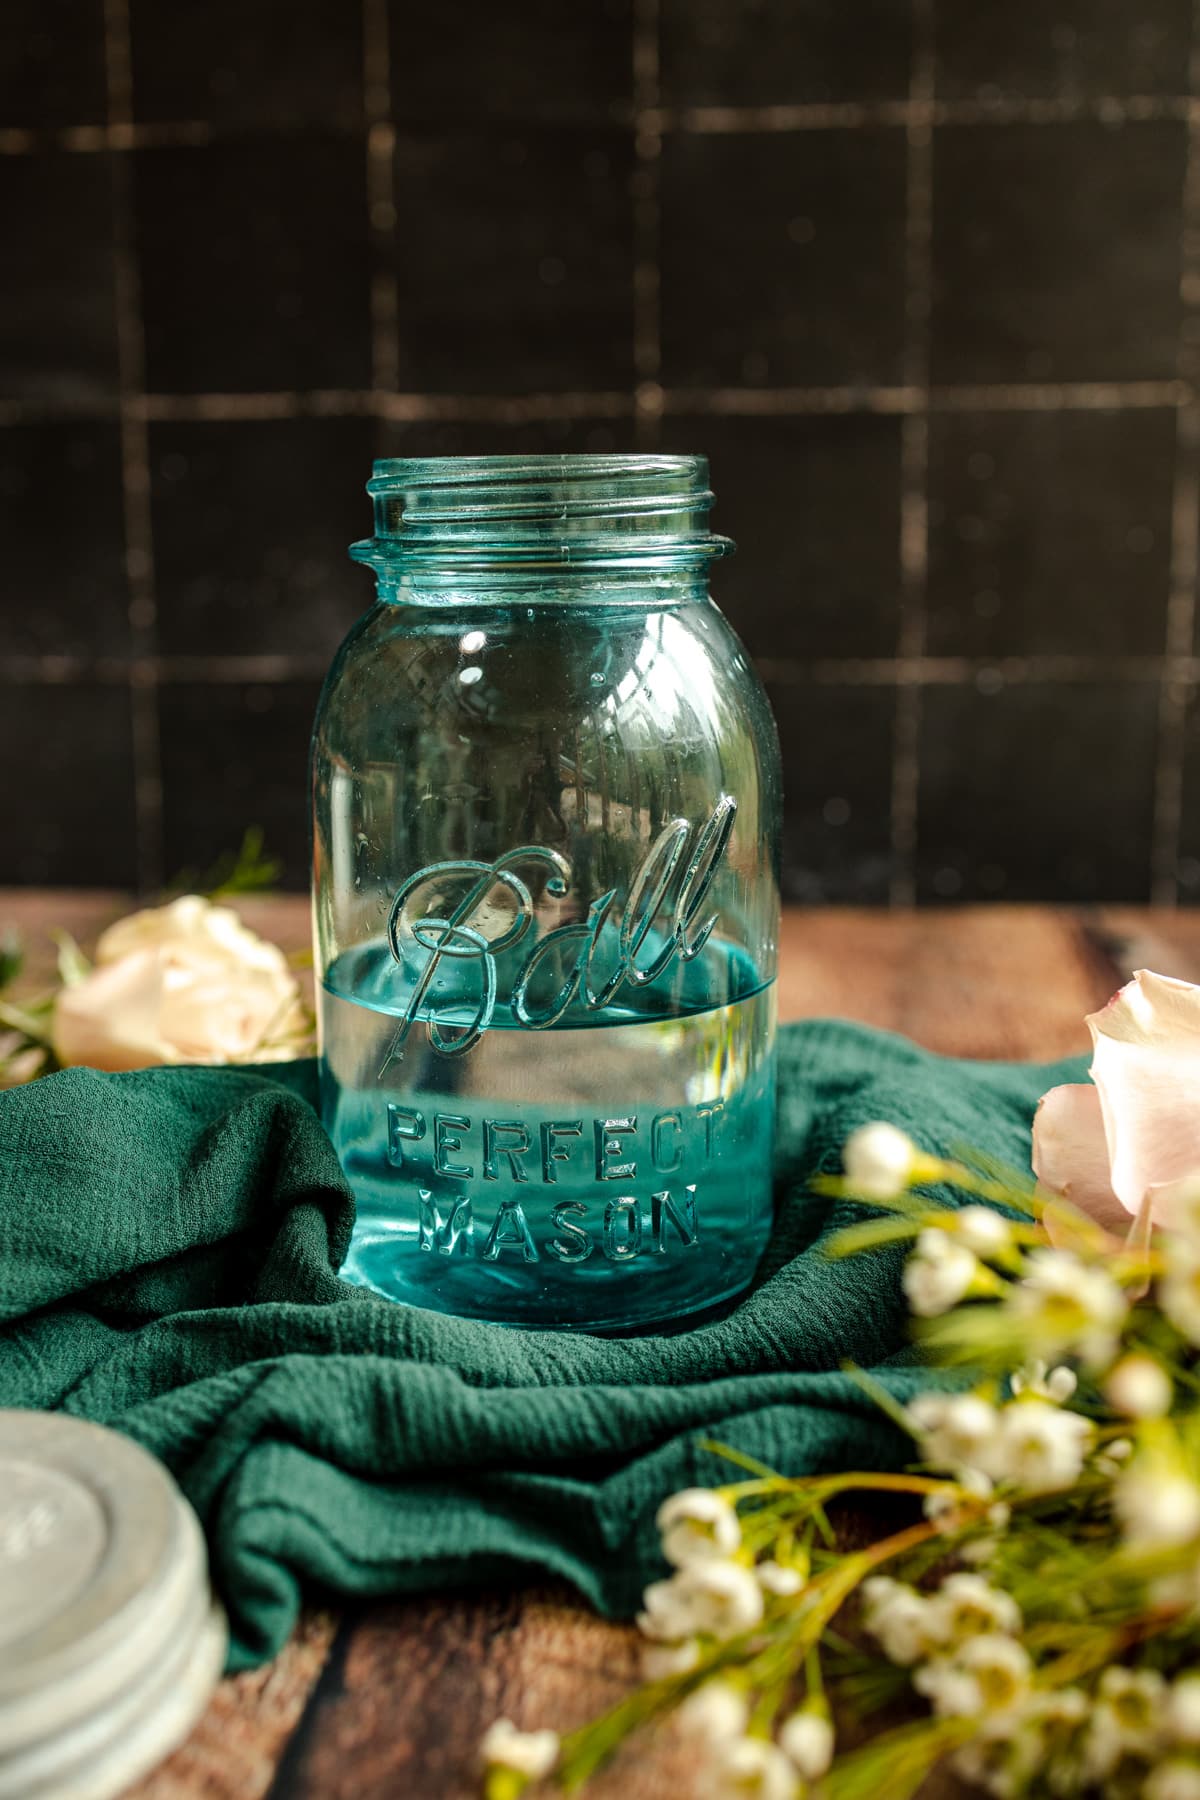 Blue glass quart sized jar filled with water.